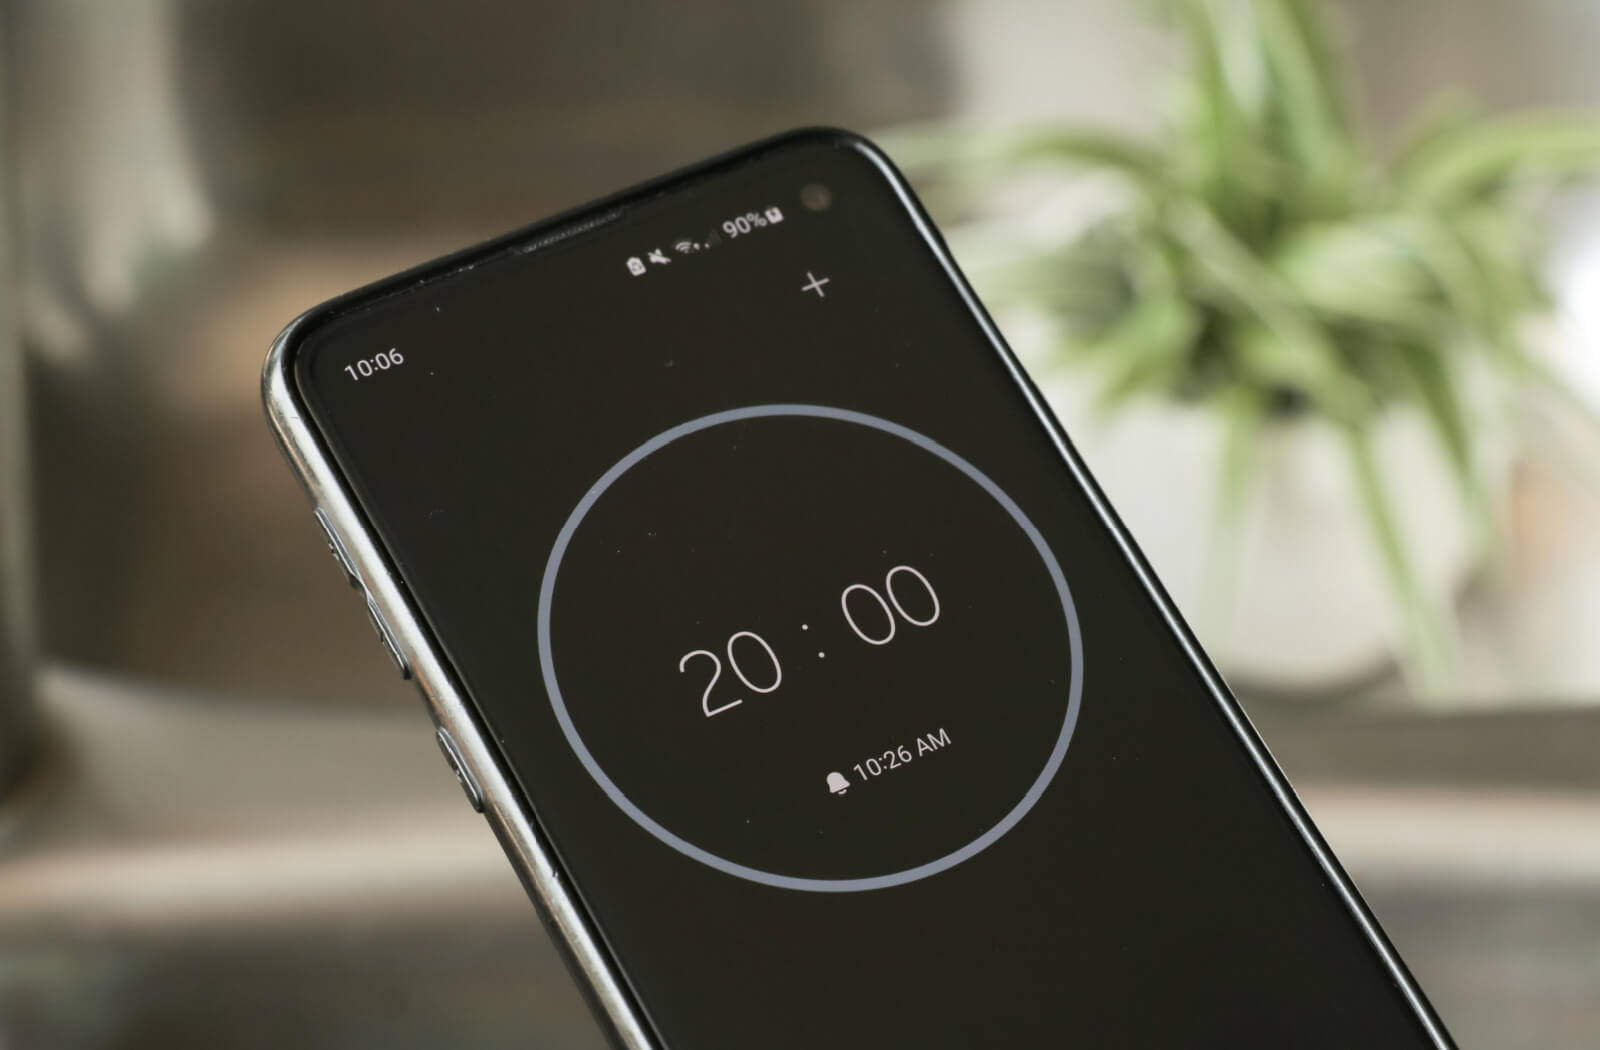 A phone with a black and white 20-minute timer is displayed.